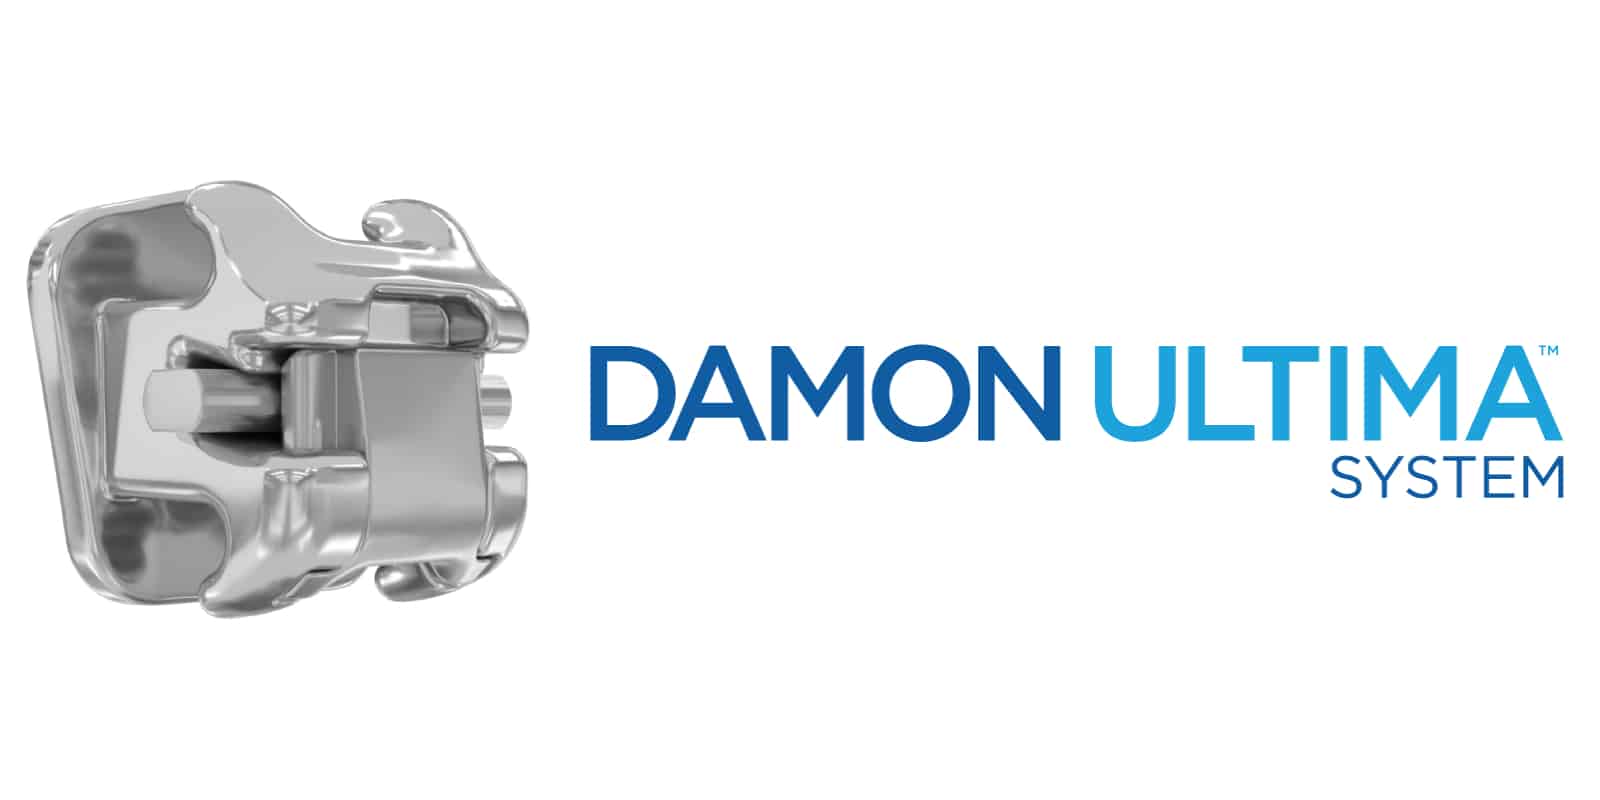 Orthodontic News Ormco Announces the Launch of the Damon Ultima